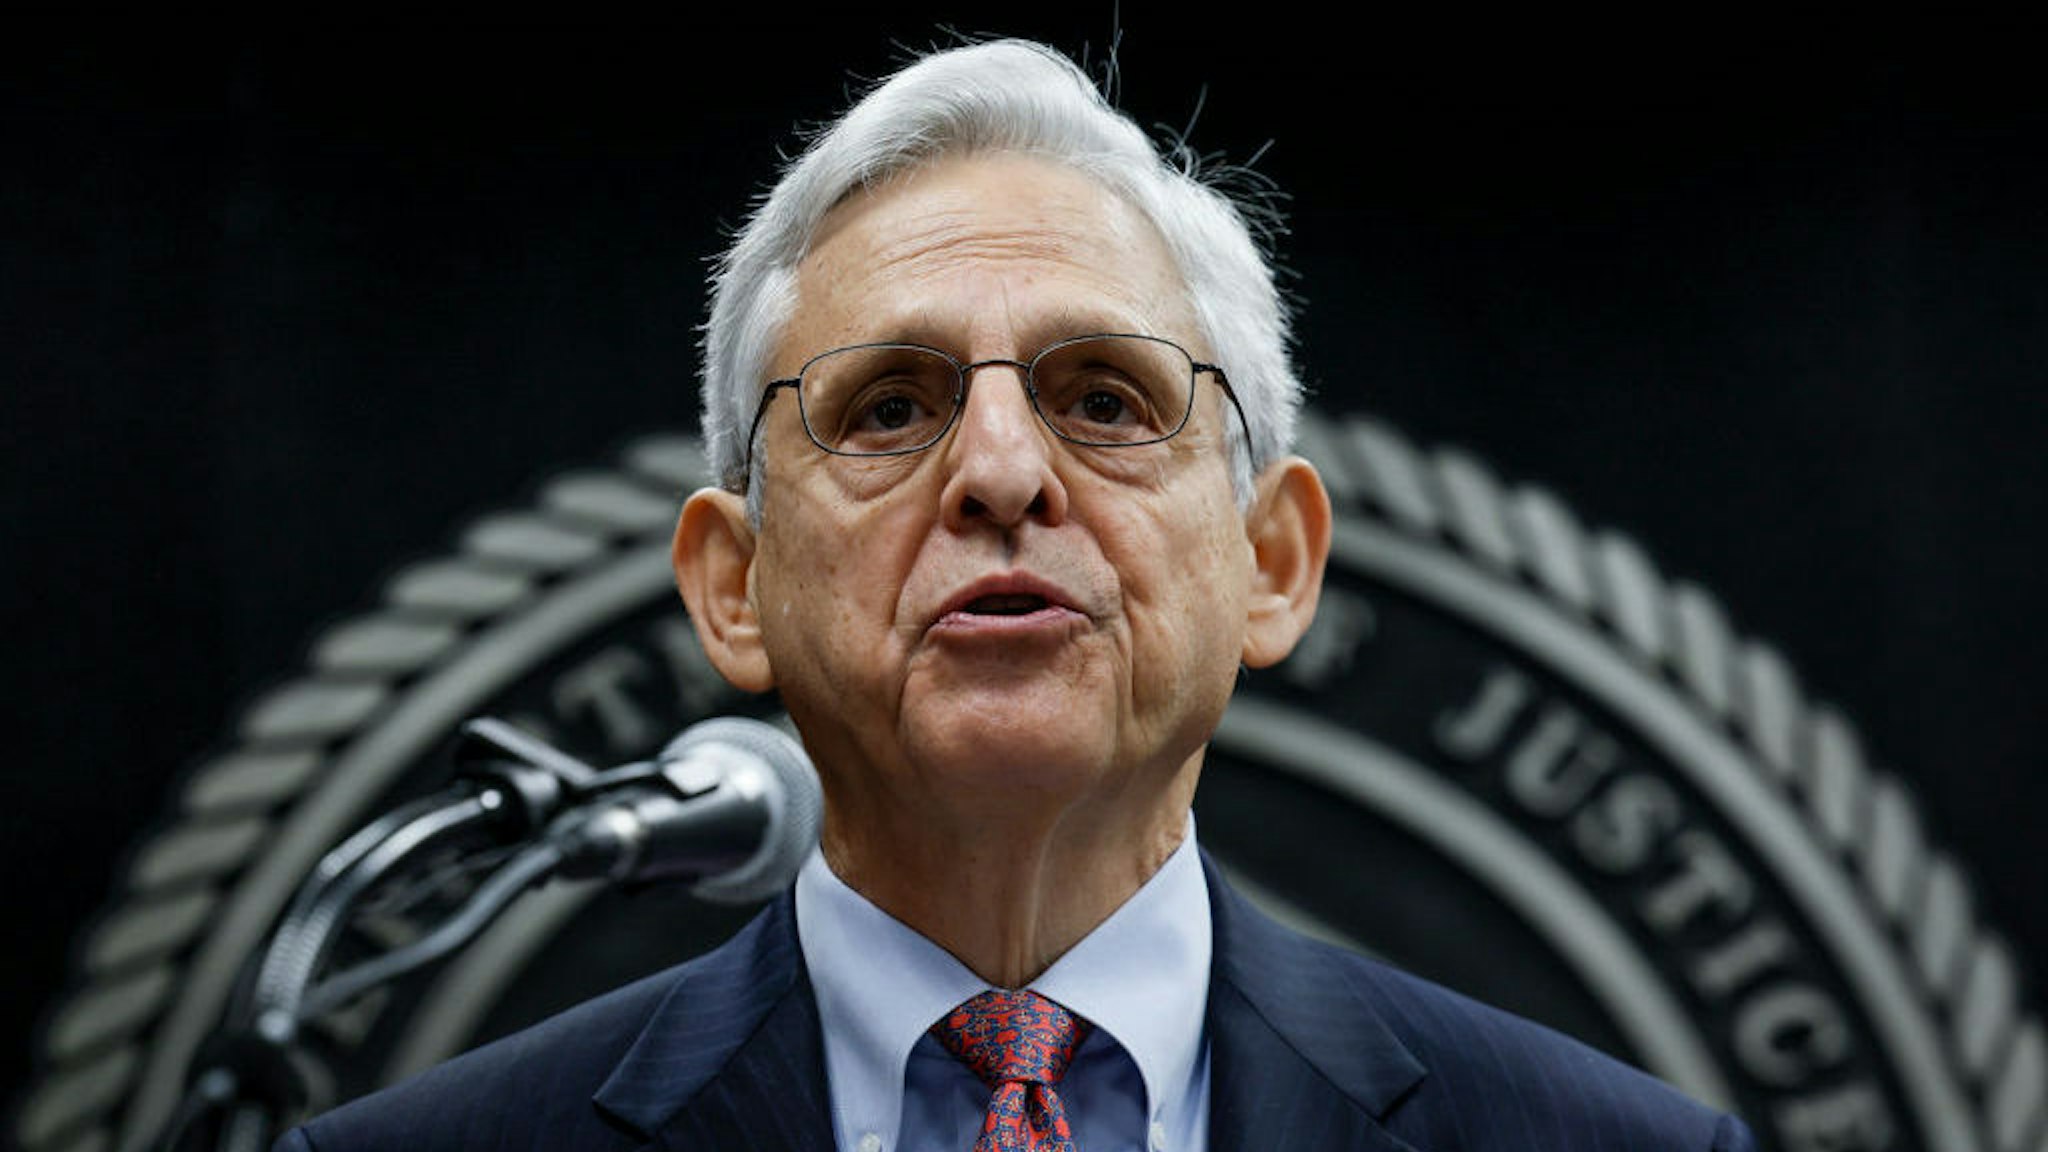 WASHINGTON, DC - AUGUST 02: U.S. Attorney General Merrick Garland speaks at the swearing in for the new Bureau of Prisons (BOP) Director Colette Peters at BOP headquarters on August 2, 2022 in Washington, DC. Peters previously served as Director of the Oregon Department of Corrections. (Photo by Evelyn Hockstein-Pool/Getty Images)